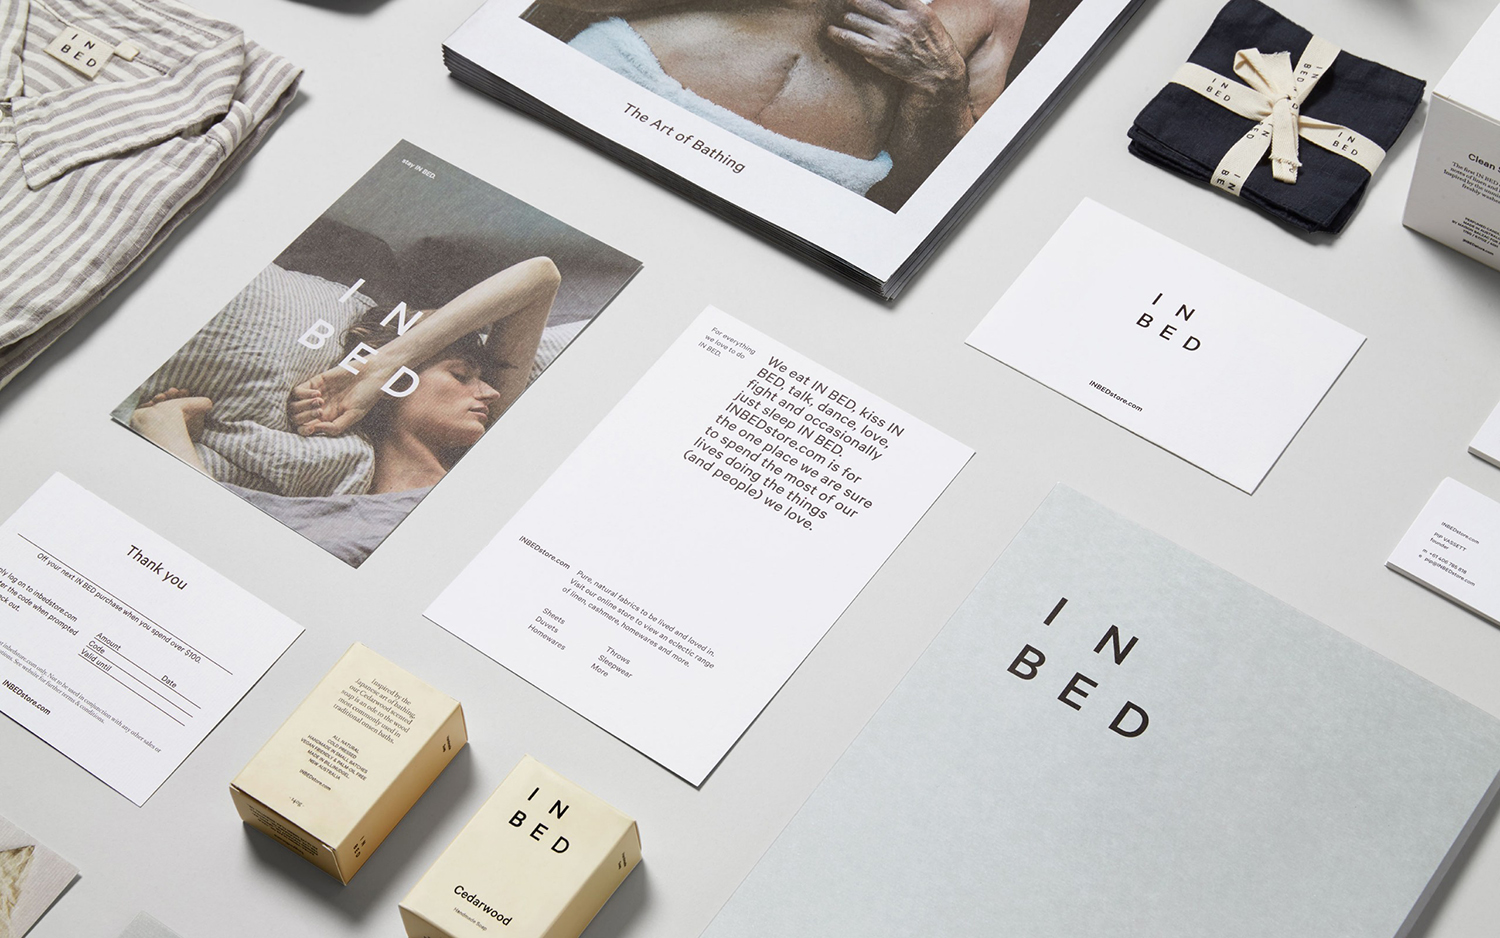 Visual identity, print and packaging for online homeware retailer In Bed designed by Moffitt.Moffitt